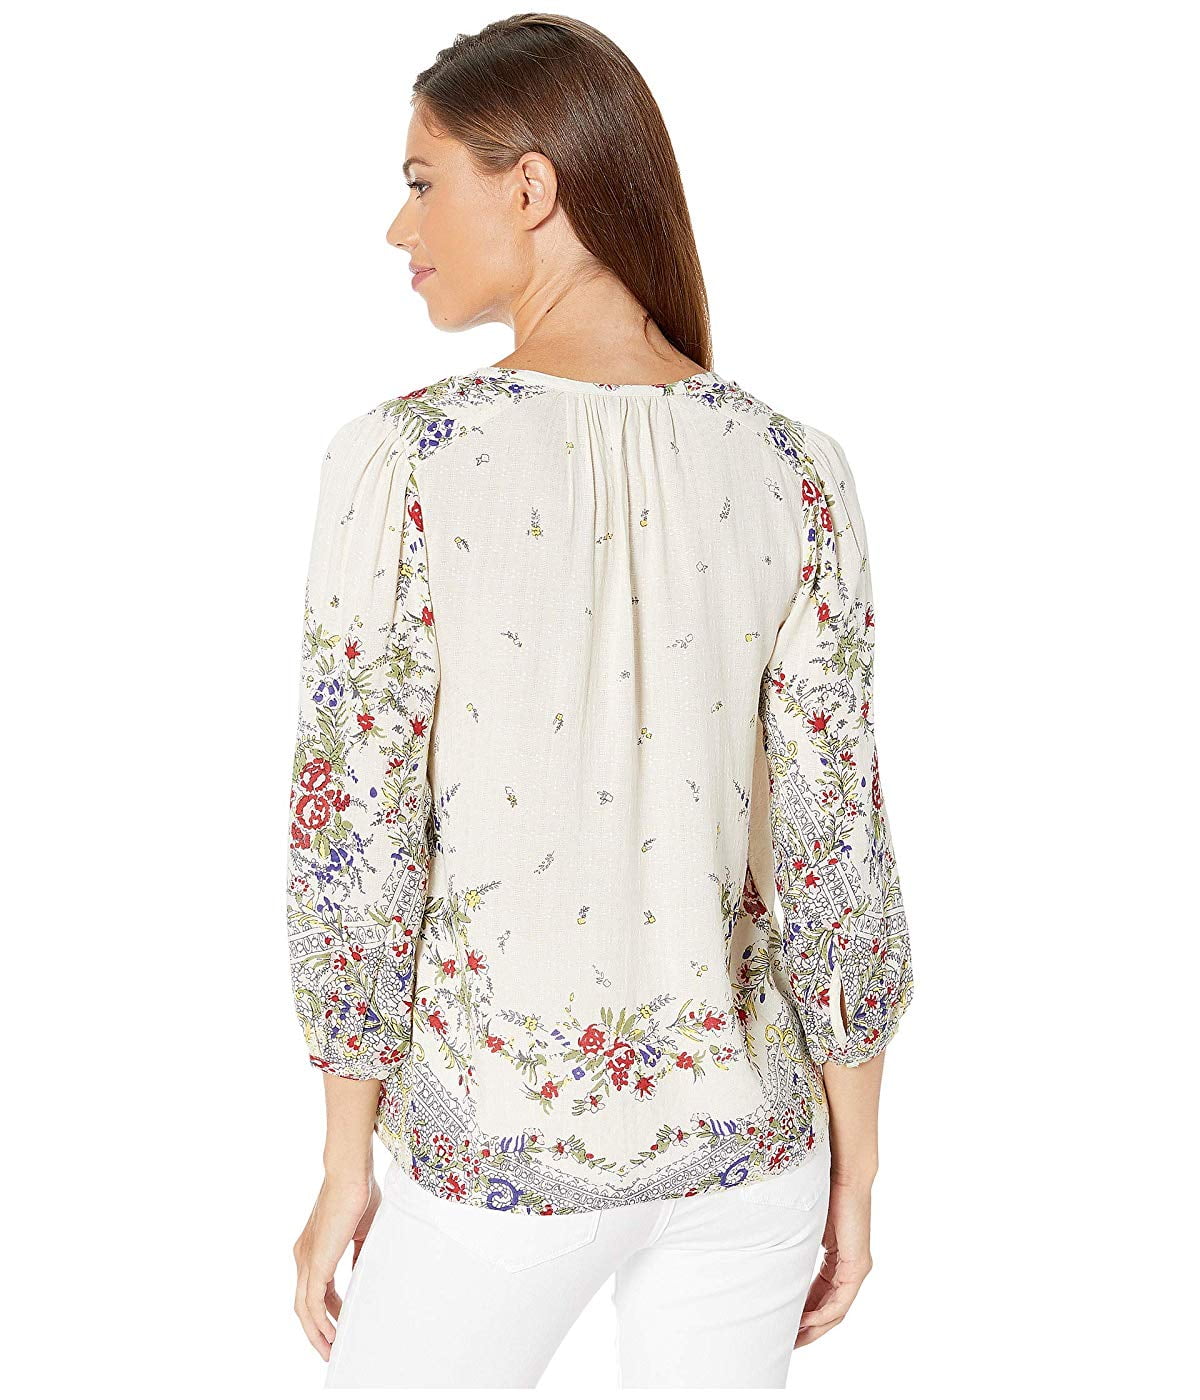 NWT Lucky Brand white floral embroidered long sleeve thermal shirt ladies  Small